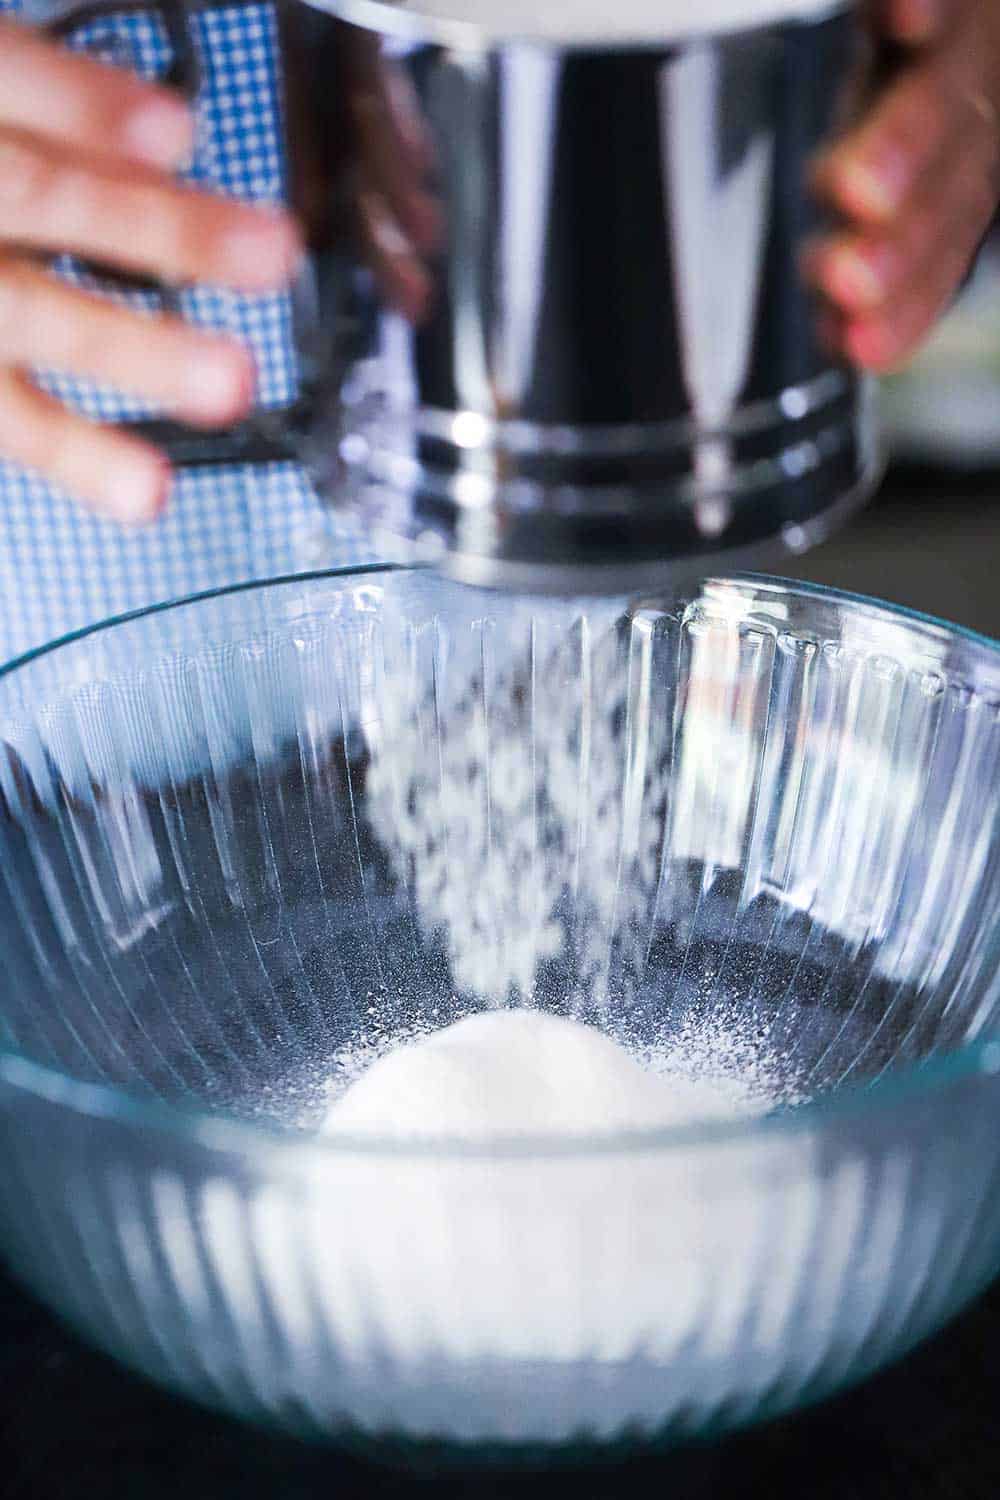 A person holding a metal sifter over a bowl while sifting flour into it. 